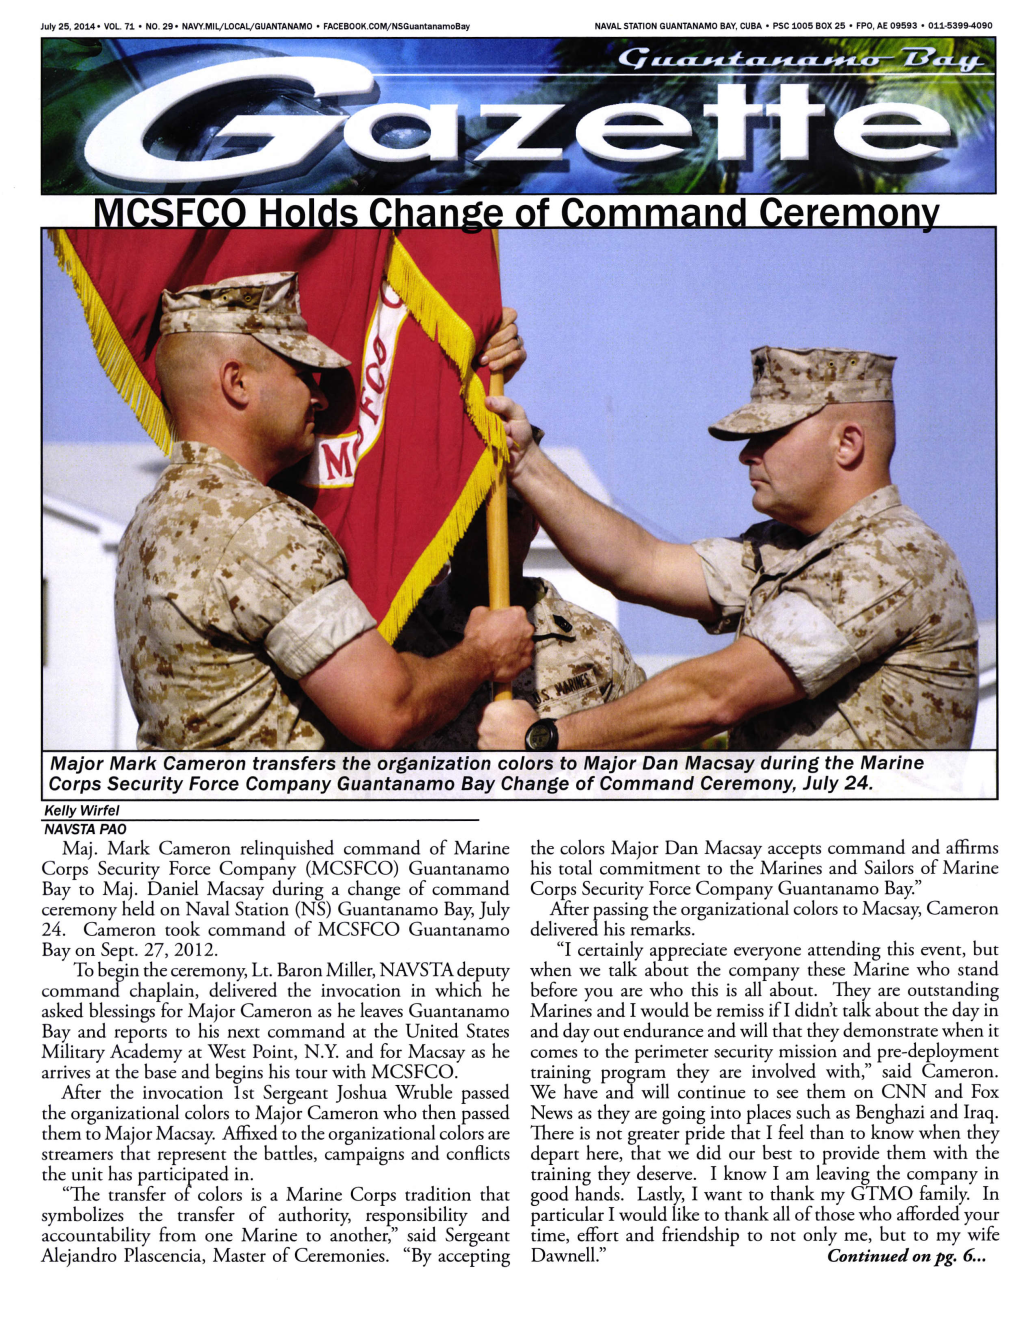 Corps Security Force Company Guantanamo Bay Change of Command Ceremony, July 24